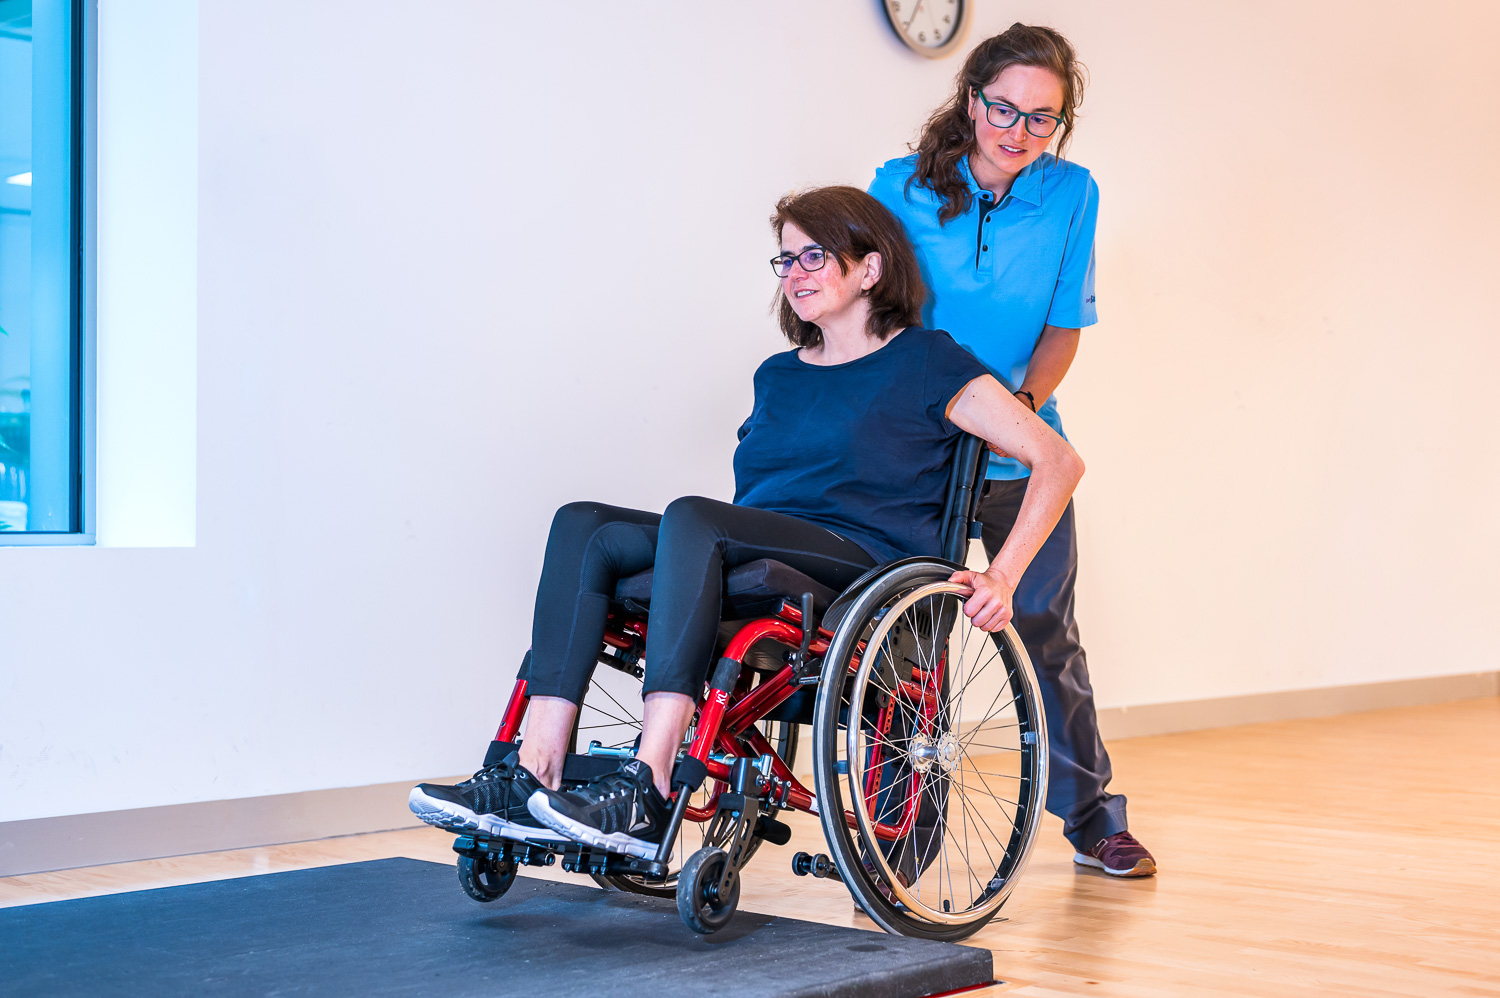 The occupational therapist helps the patient to negotiate a heel with the wheelchair.